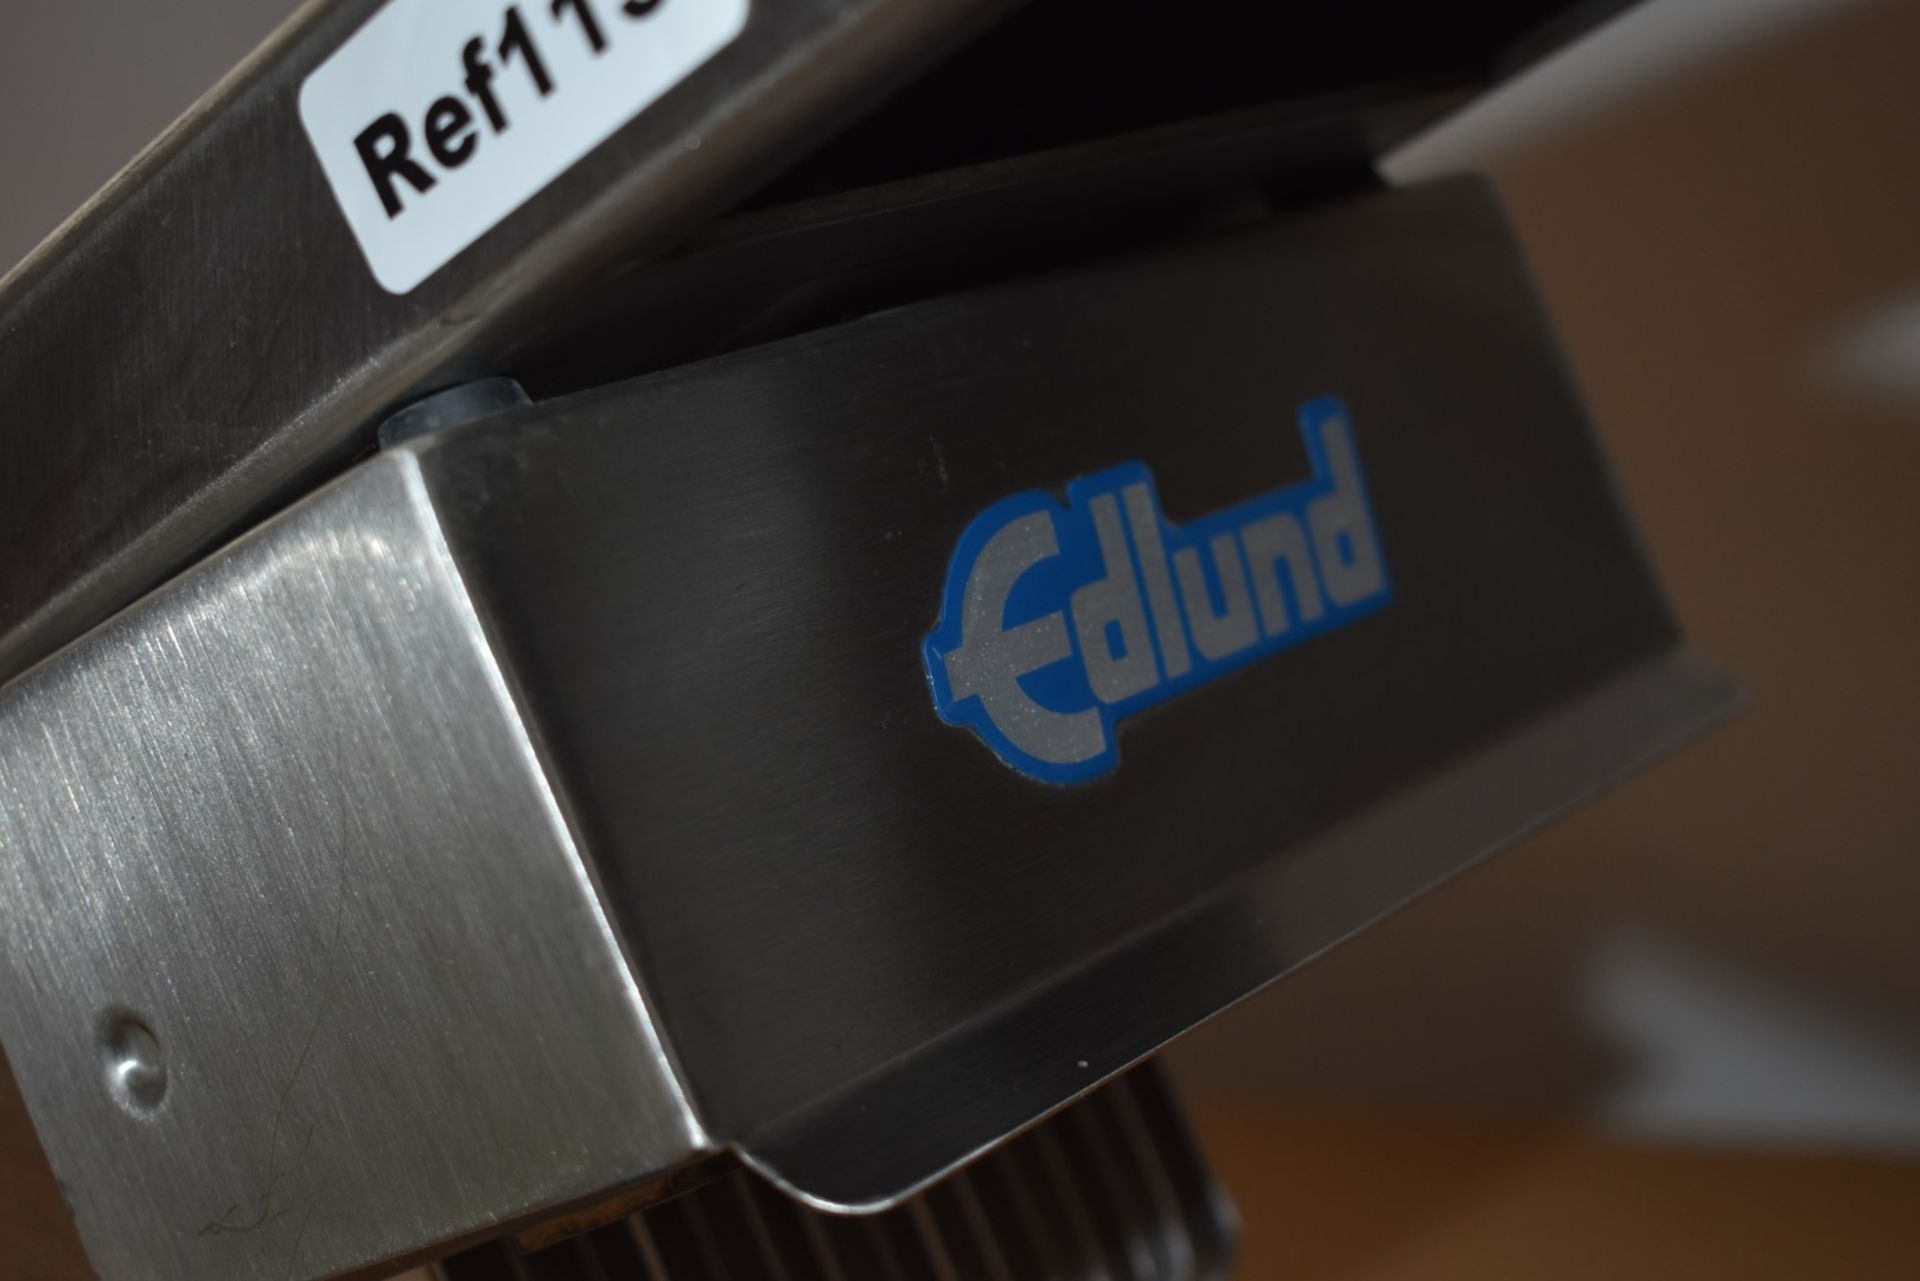 1 x Edlund XL-125 ARC Manual Fruit and Vegetable Slicer With Blades - CL232 - Ref115 - Location: - Image 4 of 11